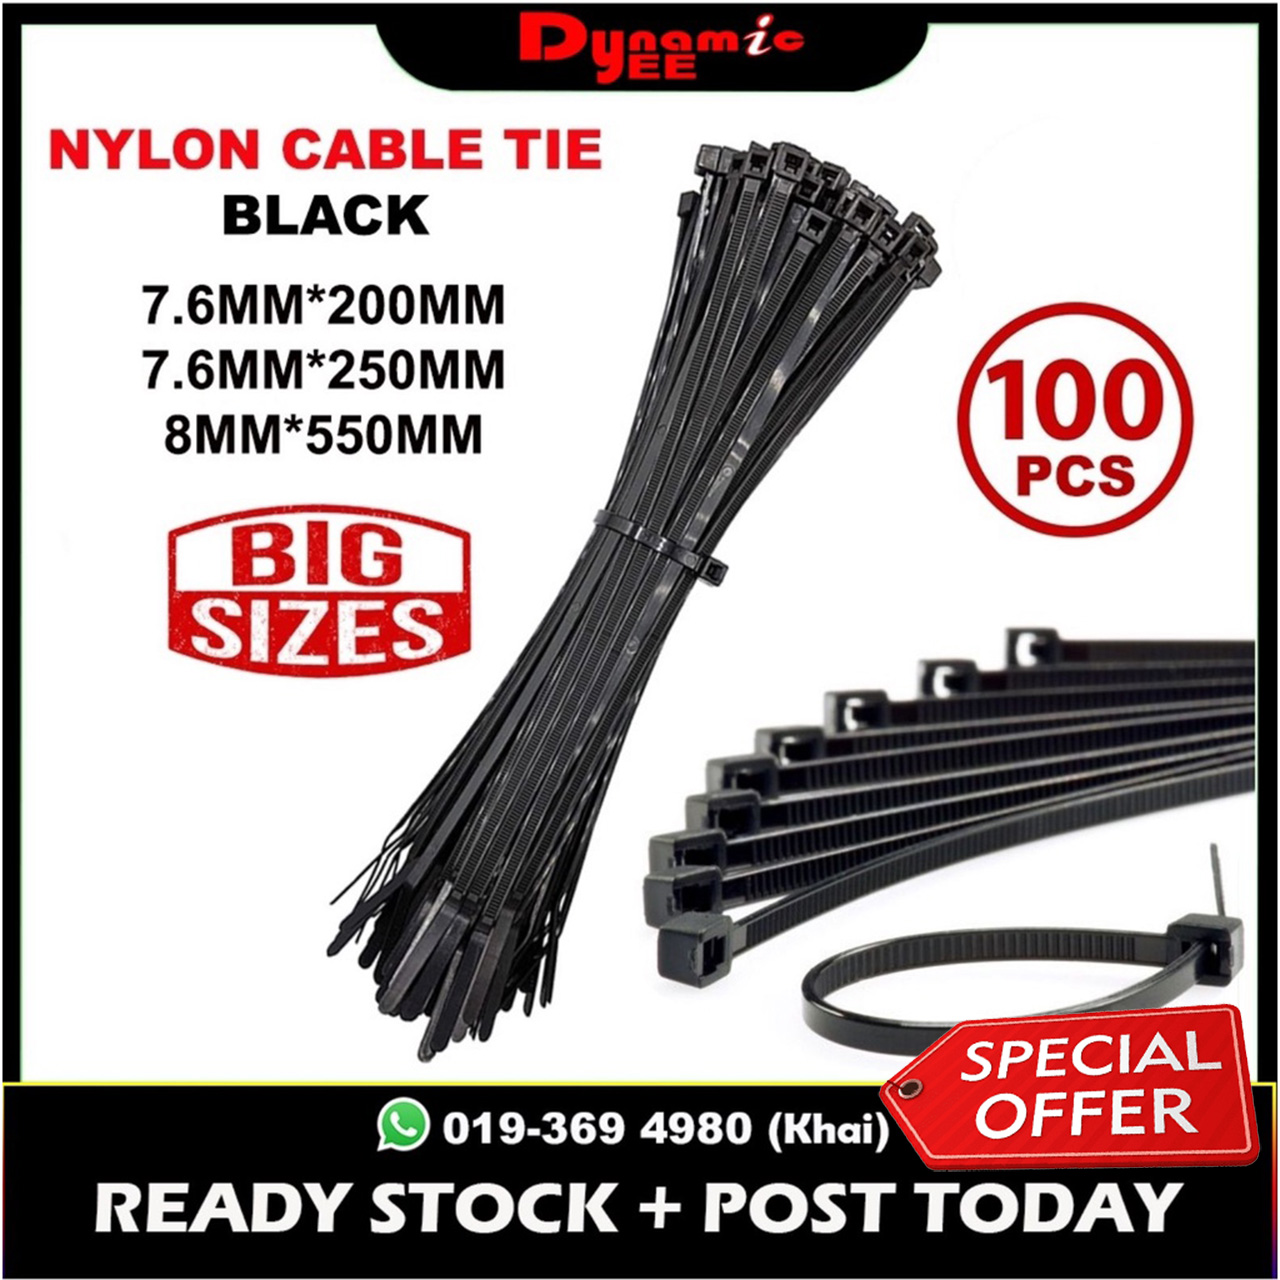 Cable Tie – Dynamic EE Zone Sdn Bhd